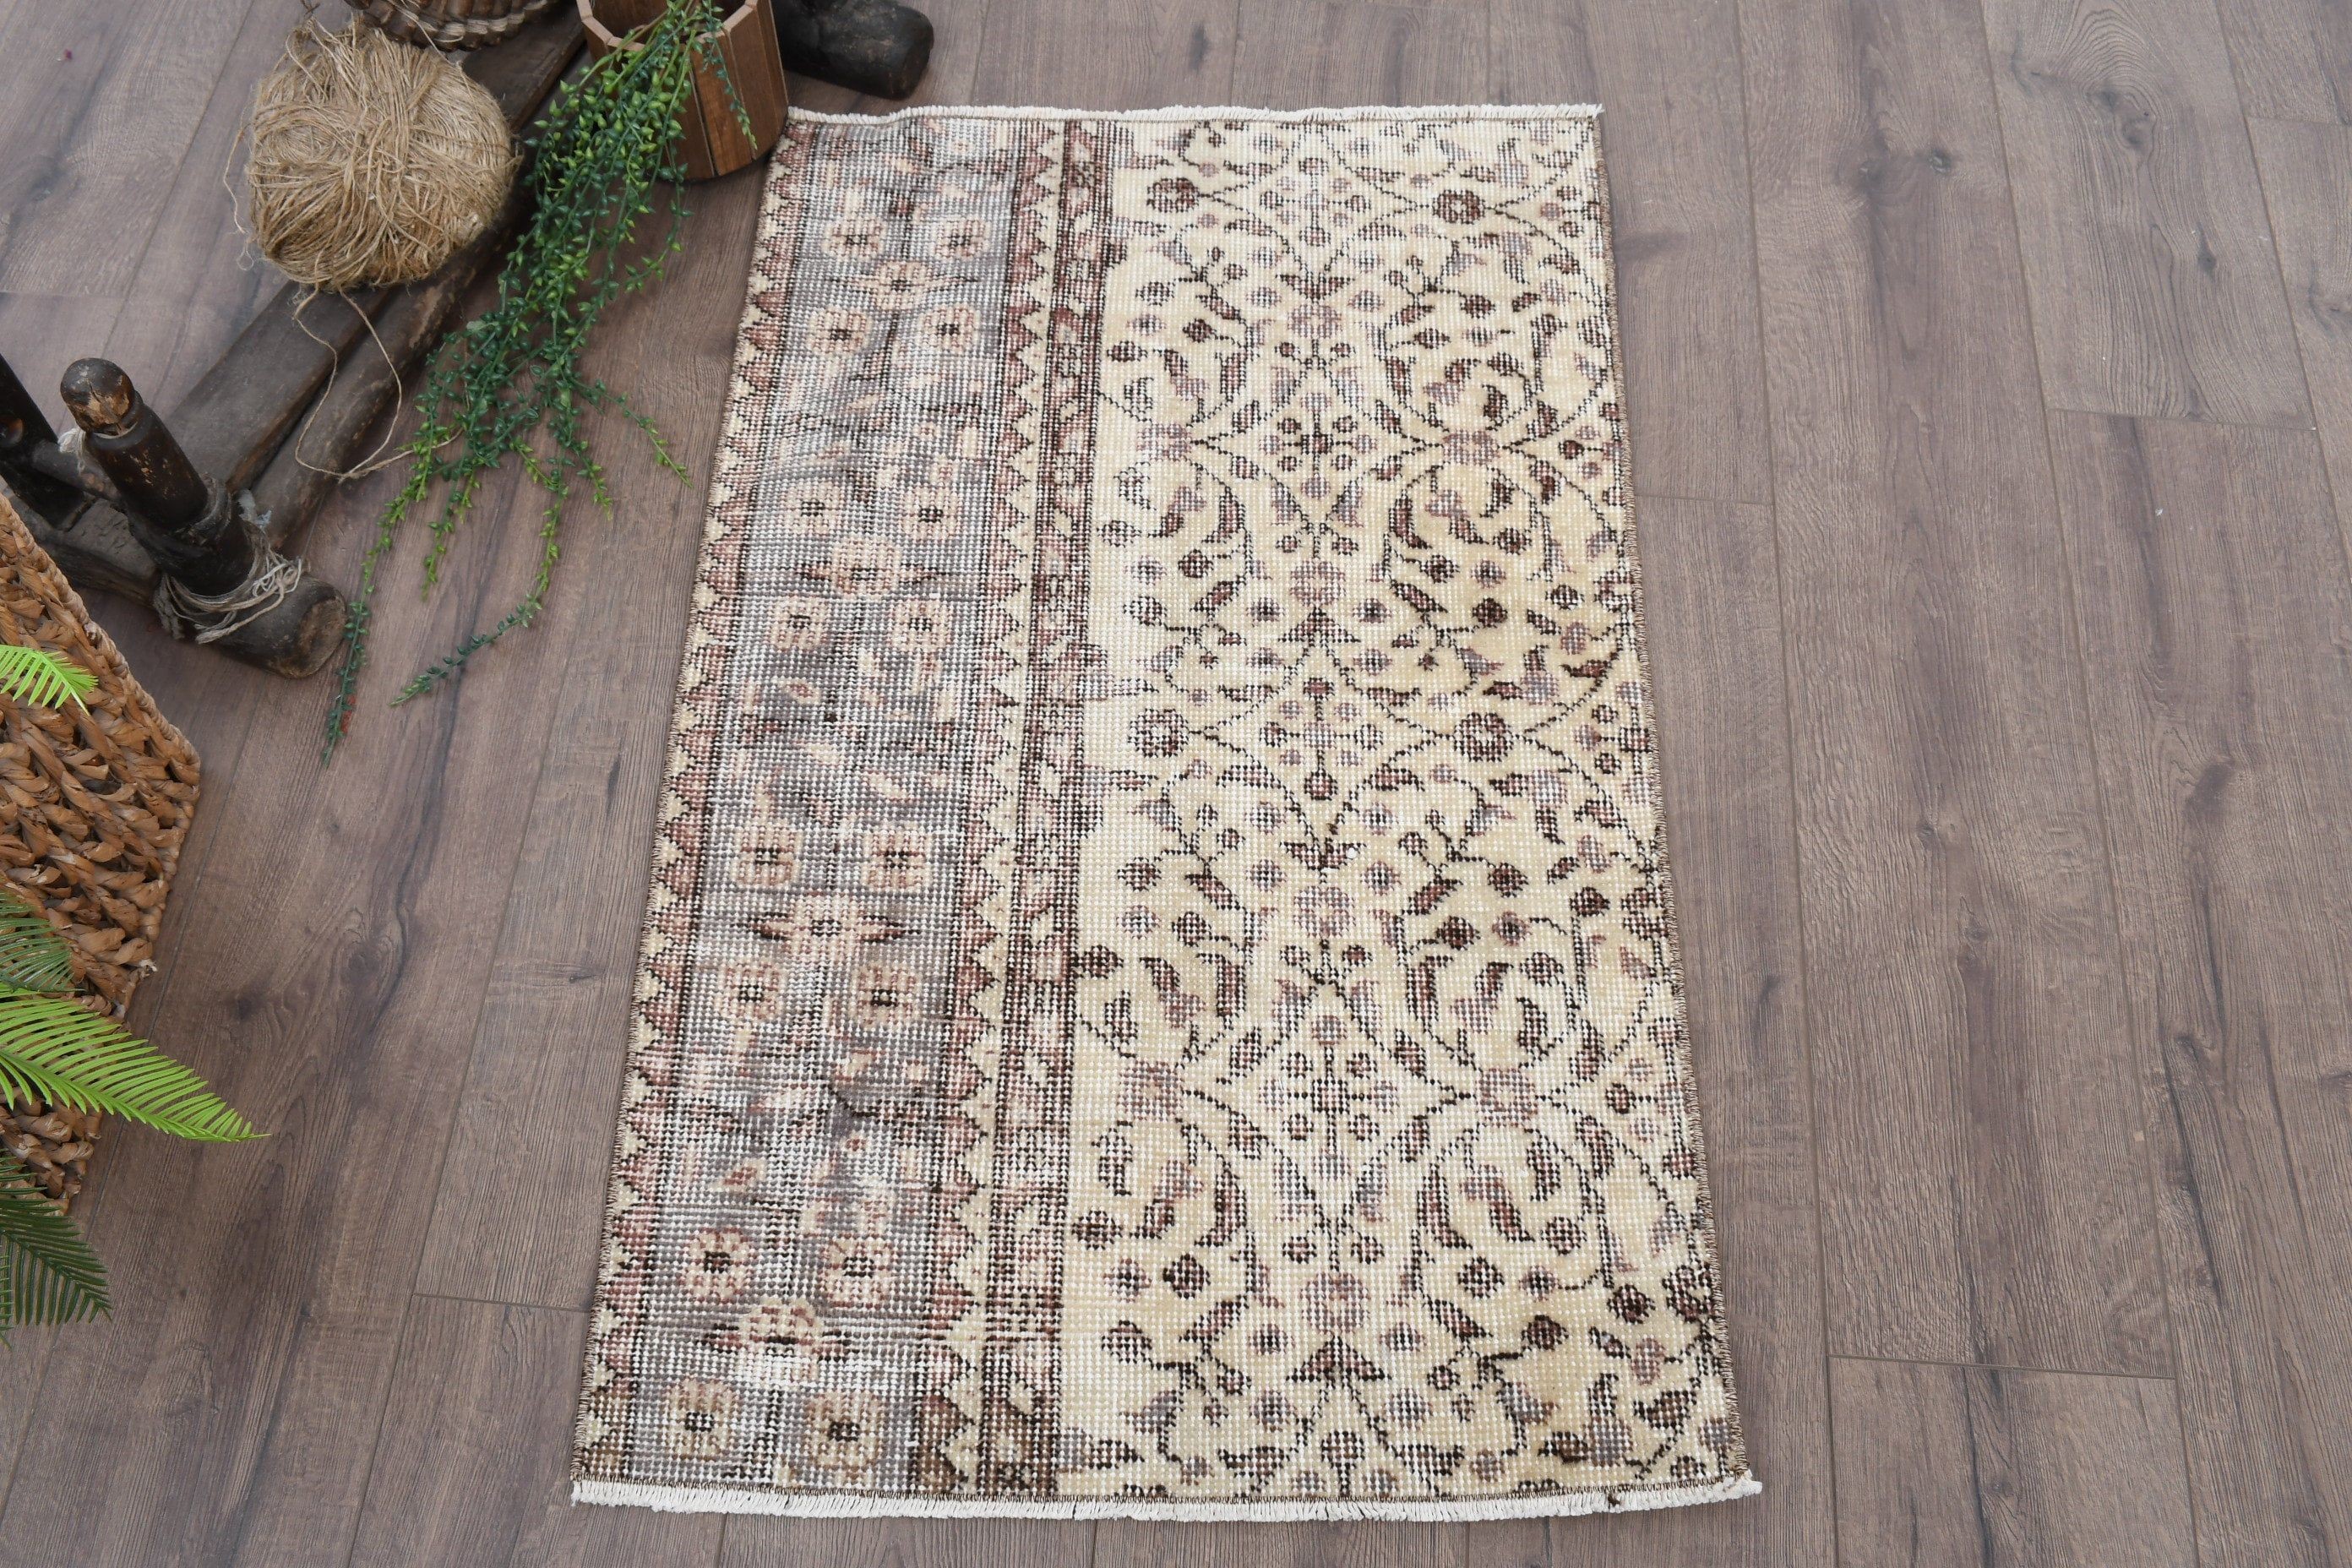 Vintage Rug, Entry Rug, Turkish Rug, 2x3.2 ft Small Rug, Interior Designer Rugs, Antique Rugs, Beige Kitchen Rugs, Wool Rug, Rugs for Entry